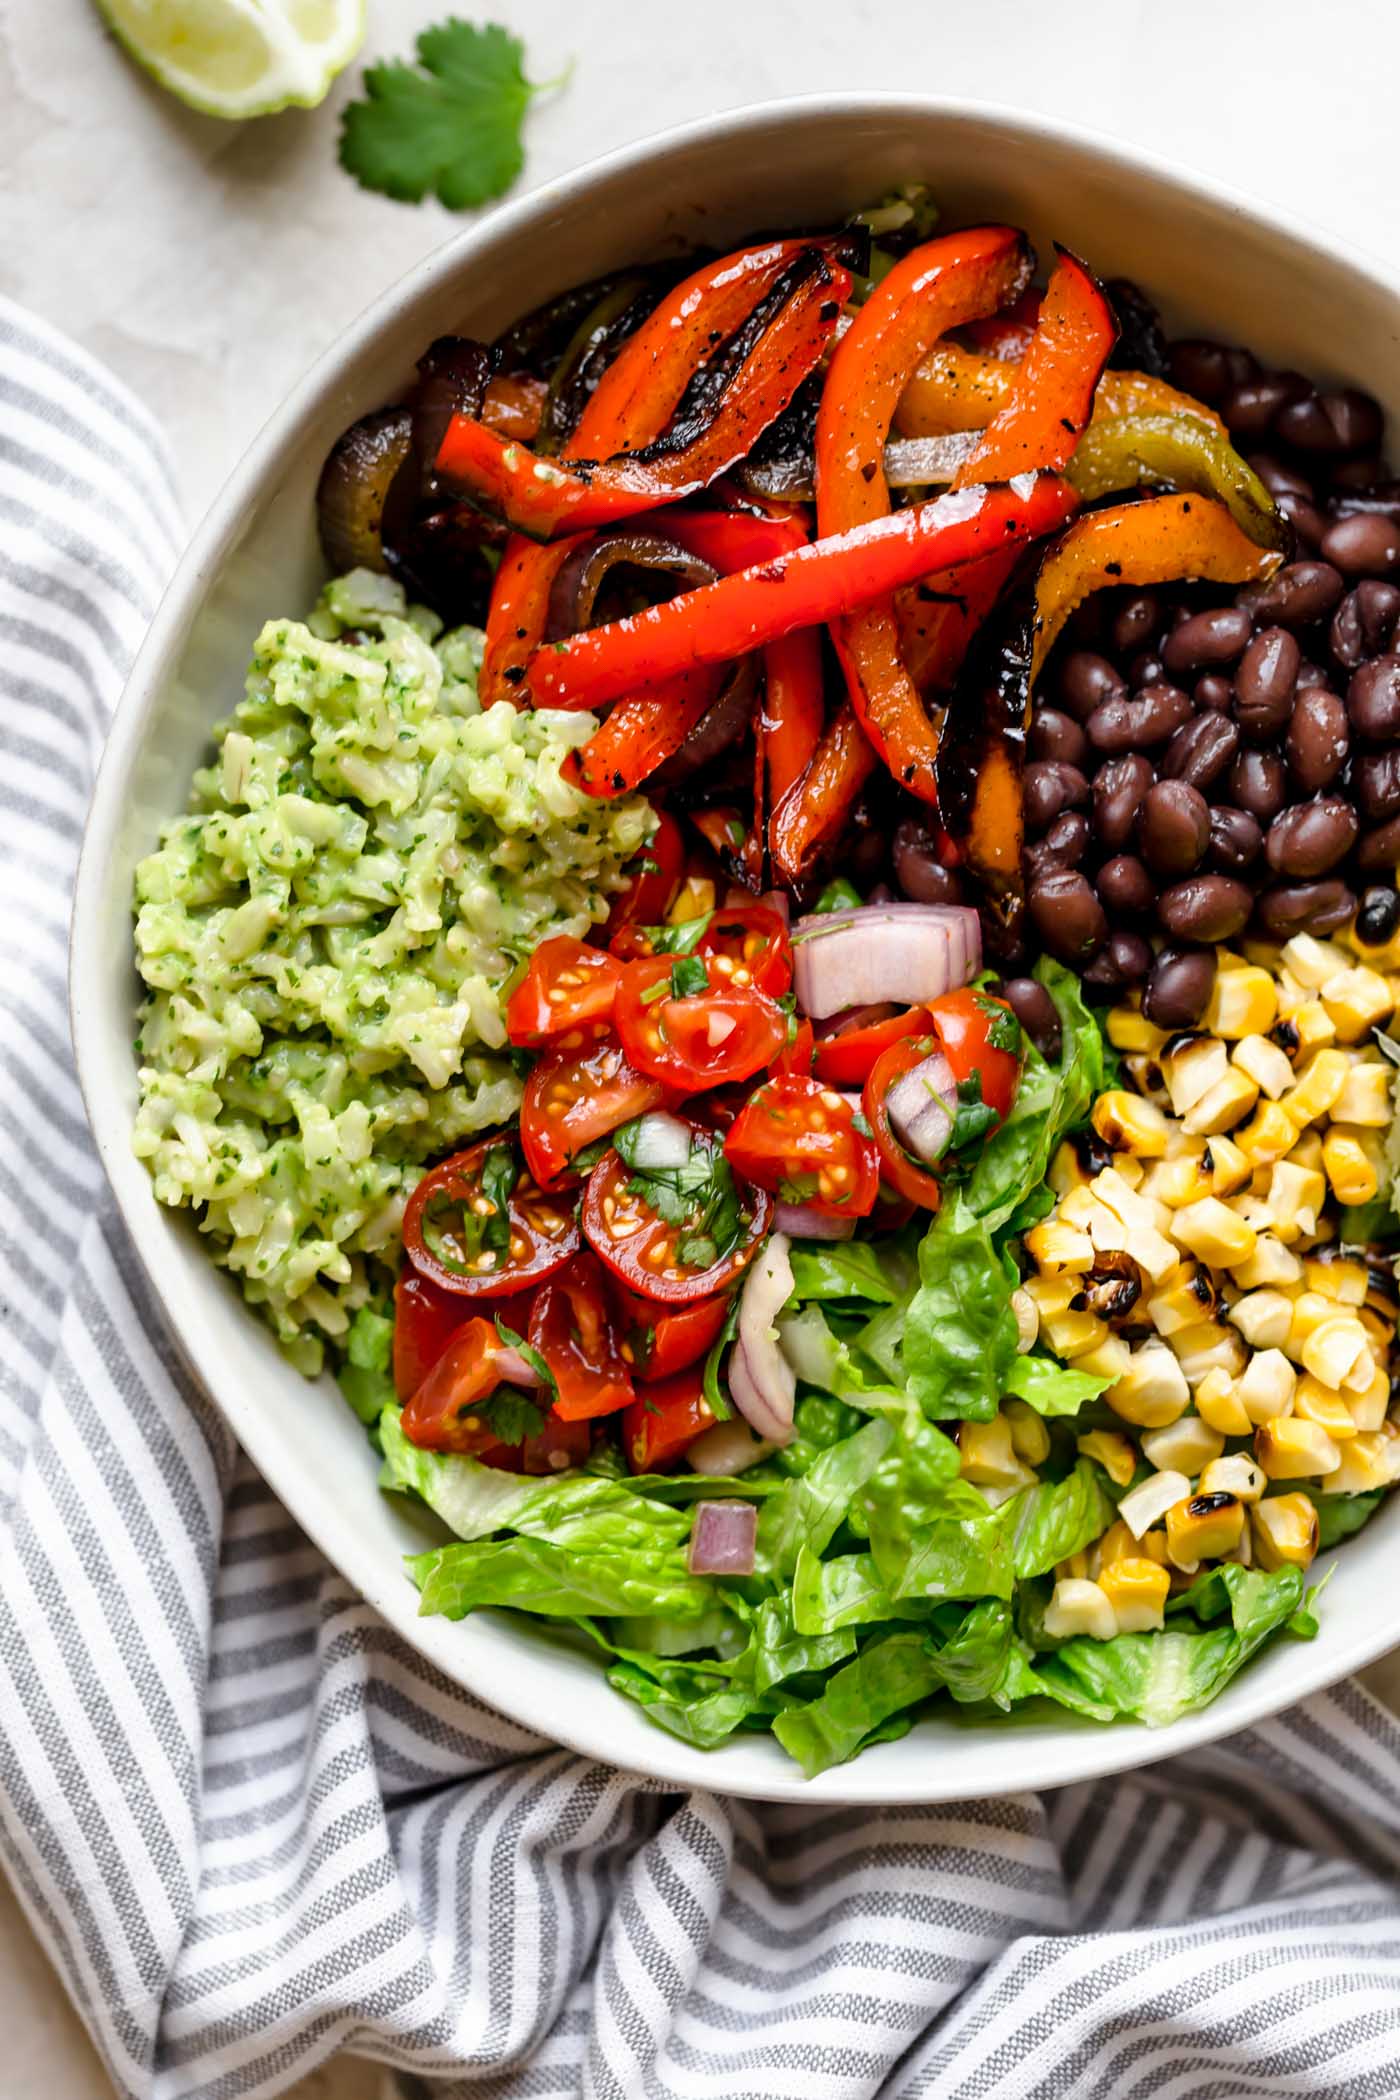 these easy & healthy grilled veggie burrito bowls are loaded with flavor! grilled peppers, onions, & sweet corn get paired with black beans & served with green rice - brown rice that’s tossed in a creamy avocado sauce. move over chipotle! wholesome, plant-based, naturally vegan & gluten-free, & meal prep-friendly! & #playswellwithbutter #veggieburritobowl #healthyburritobowlrecipe #easyrecipe #healthyrecipe #mealpreprecipe #grilledvegetables #greenrice #vegetarian #plantbased #vegan #easyvegandinnerrecipe #glutenfree #easyglutenfreereceipe